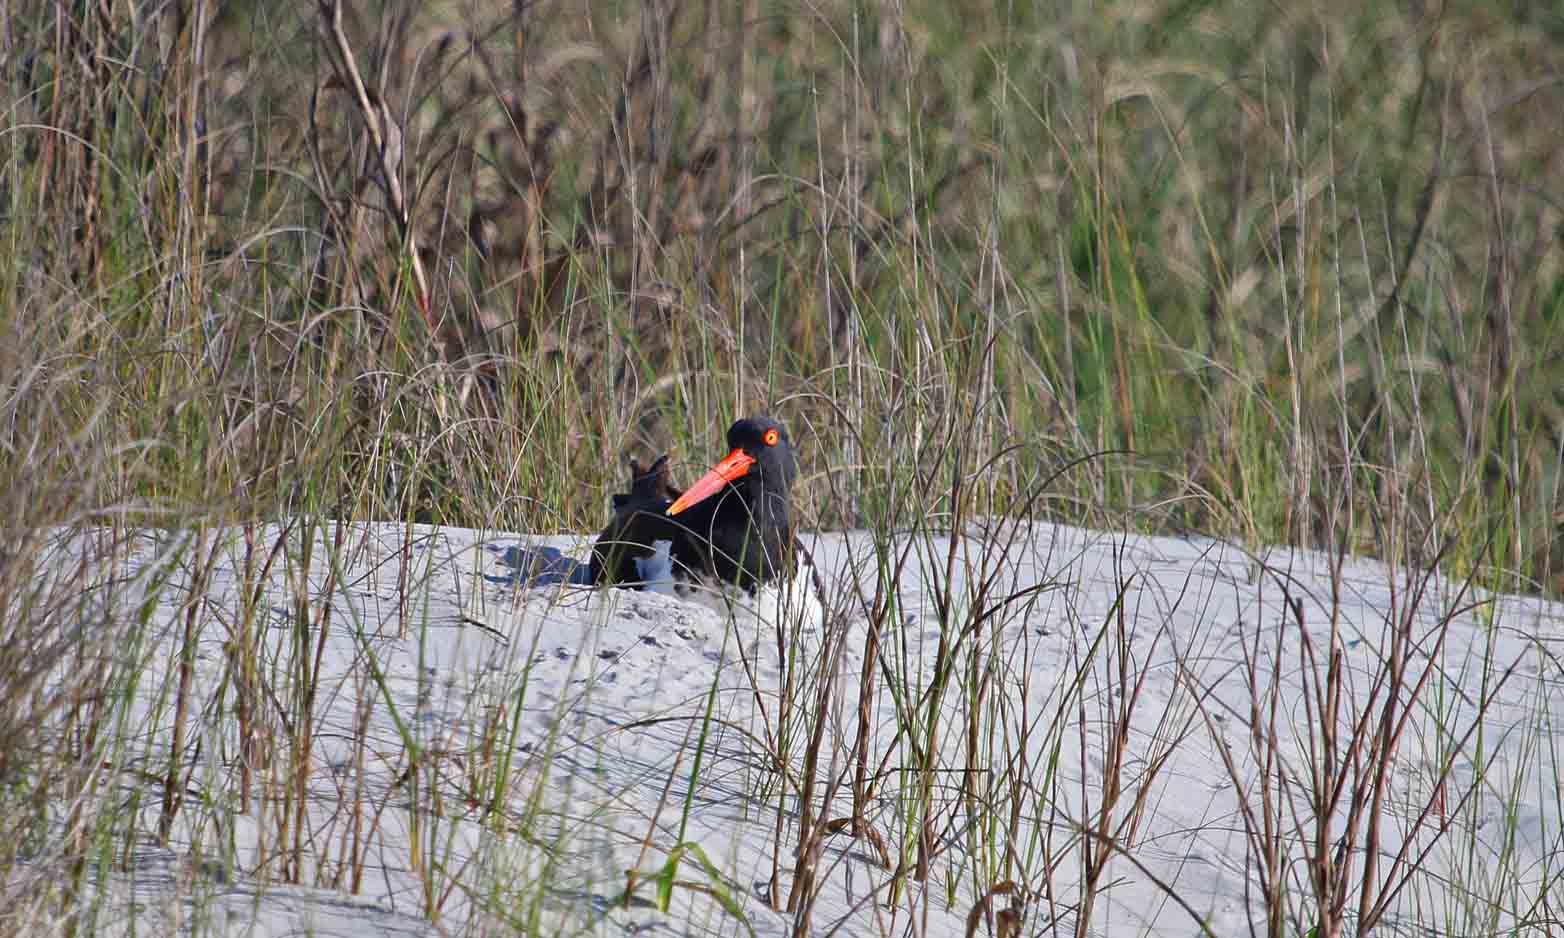 North Carolina Brunswick Islands’ flashiest shorebird, the American Oystercatcher, is known for its large bright red-orange bill, black head and white belly and its loud distinctive voice.